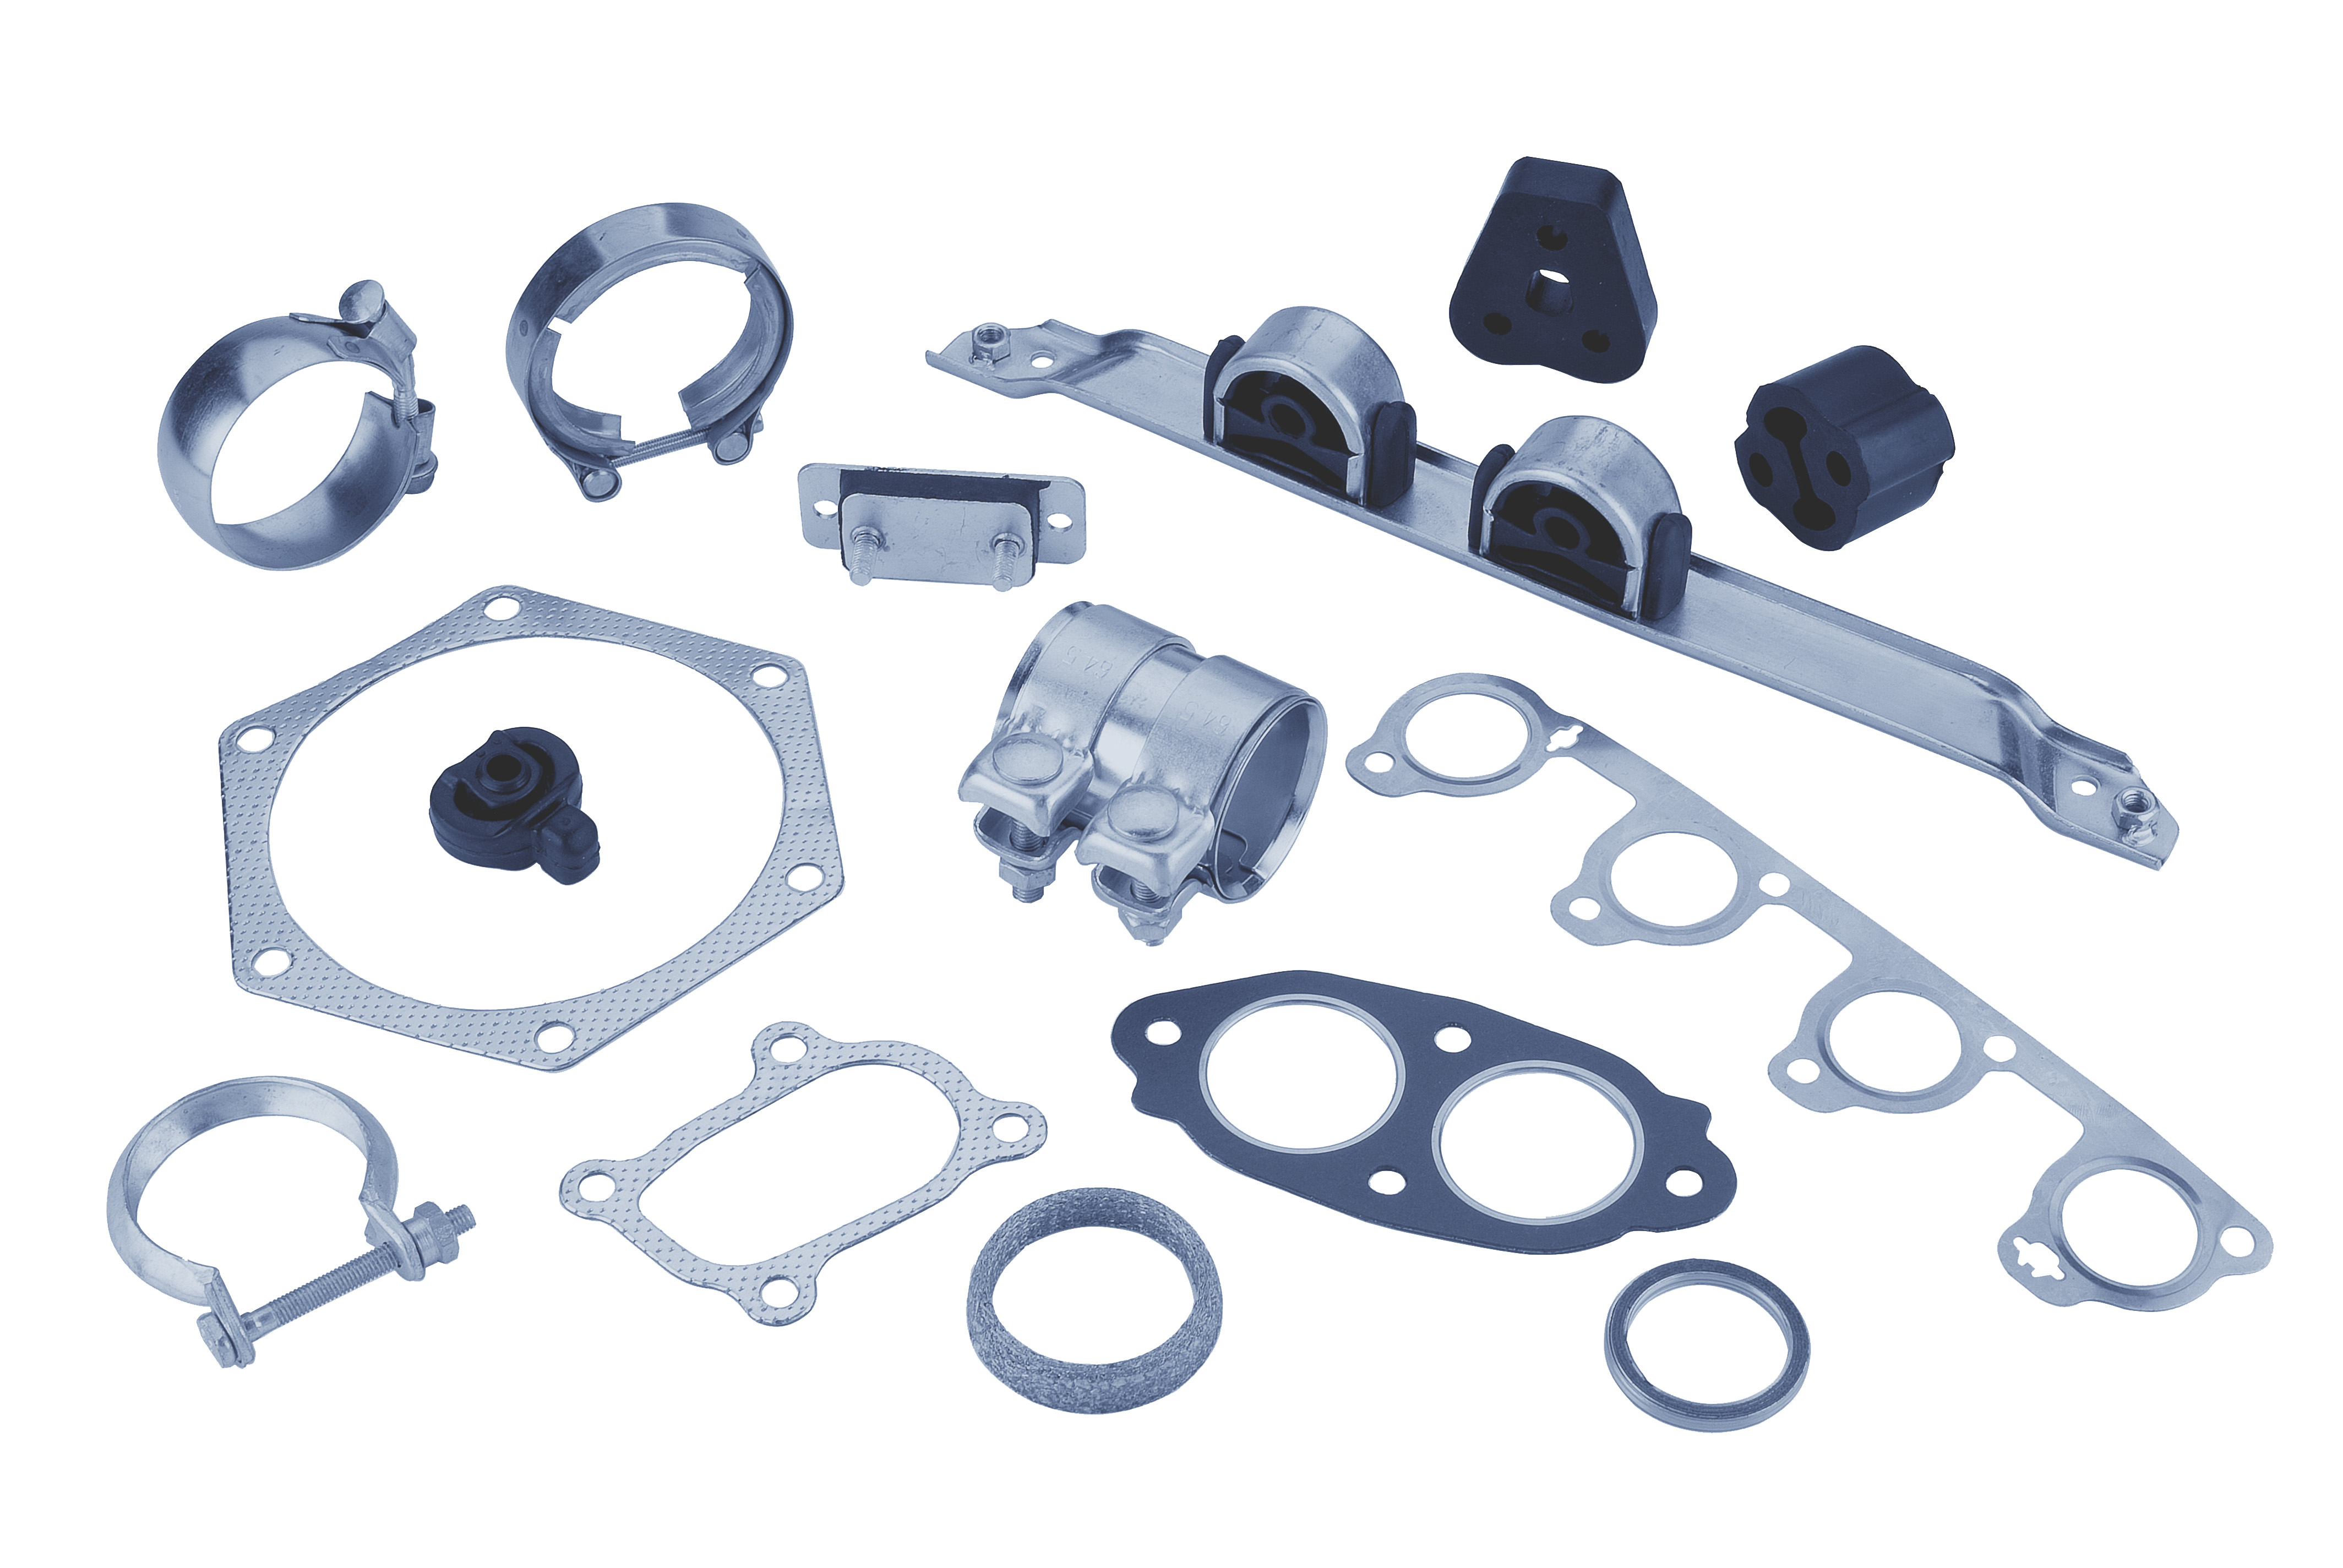 Klarius offers a wide range of bespoke mountings for when a replacement is needed.